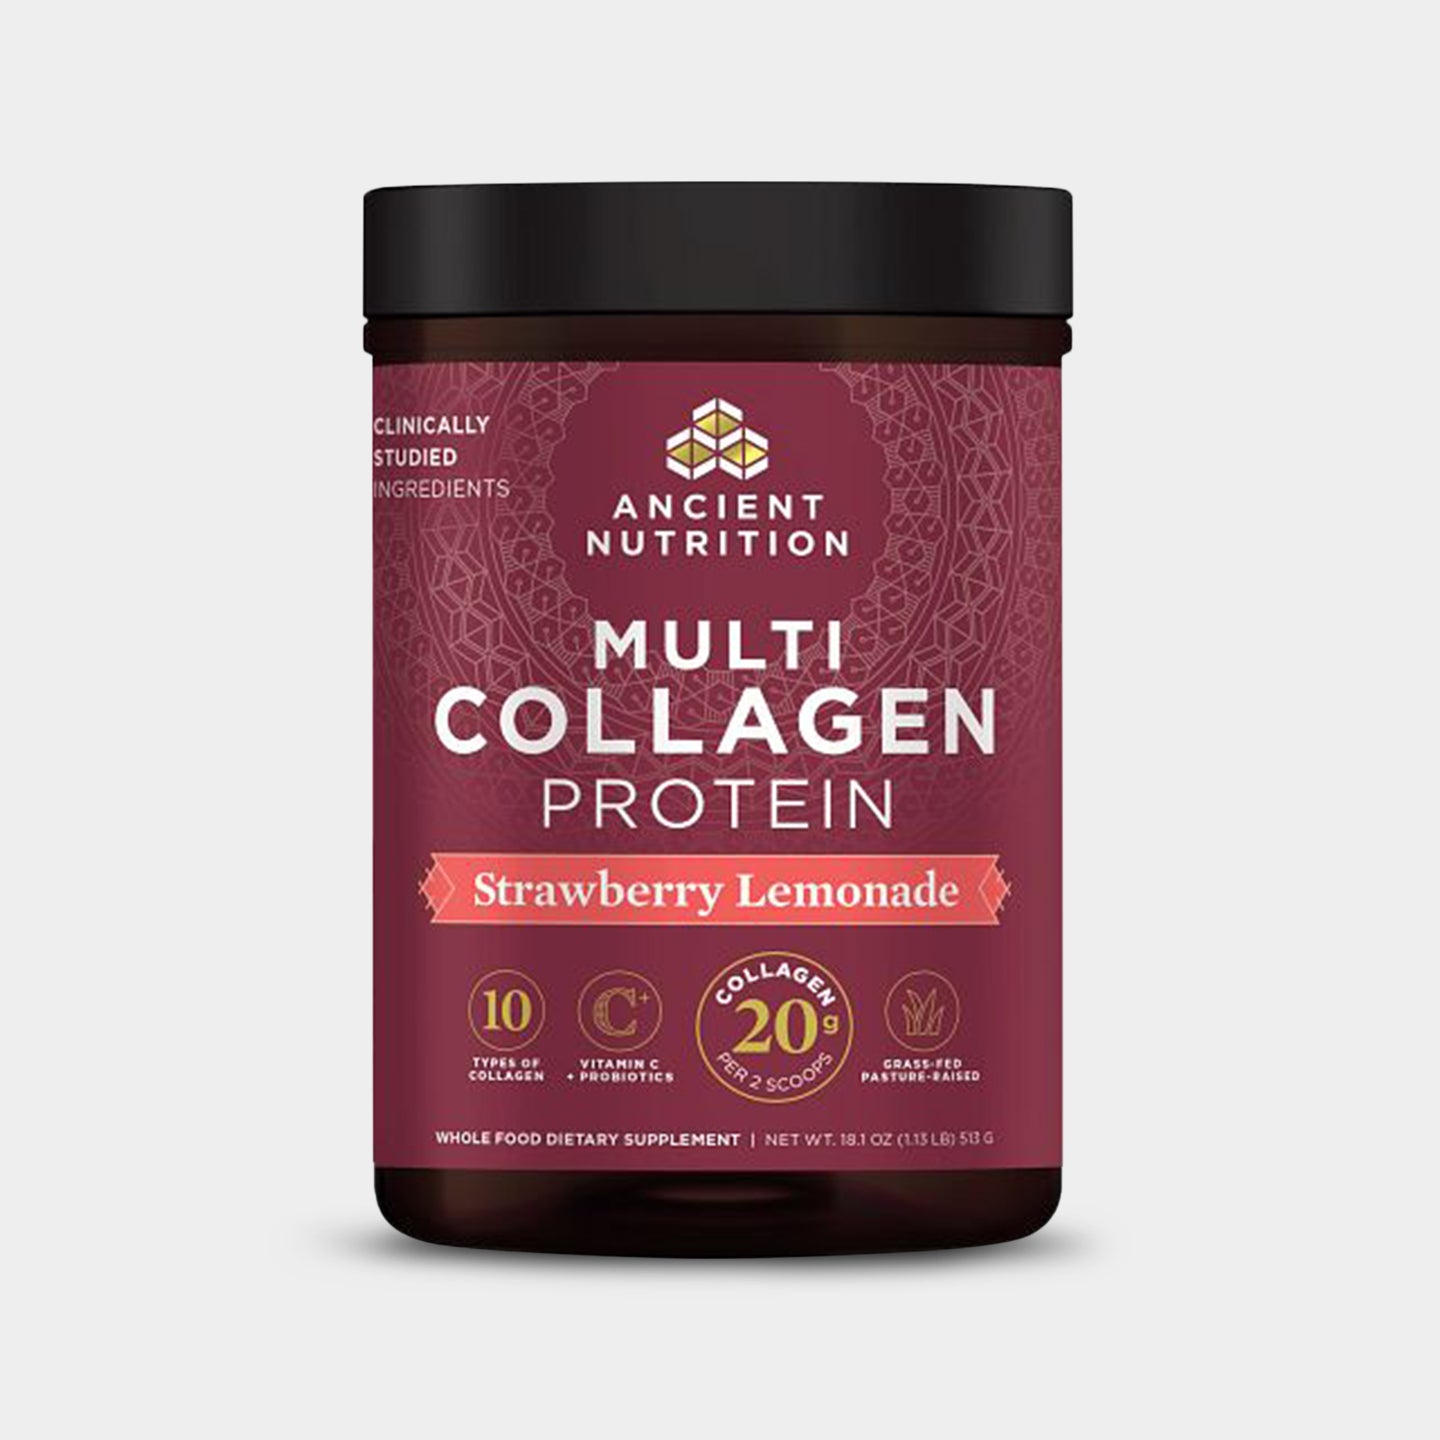 Ancient Nutrition Multi Collagen Protein - 20g, Strawberry Lemonade, 45 Servings A1